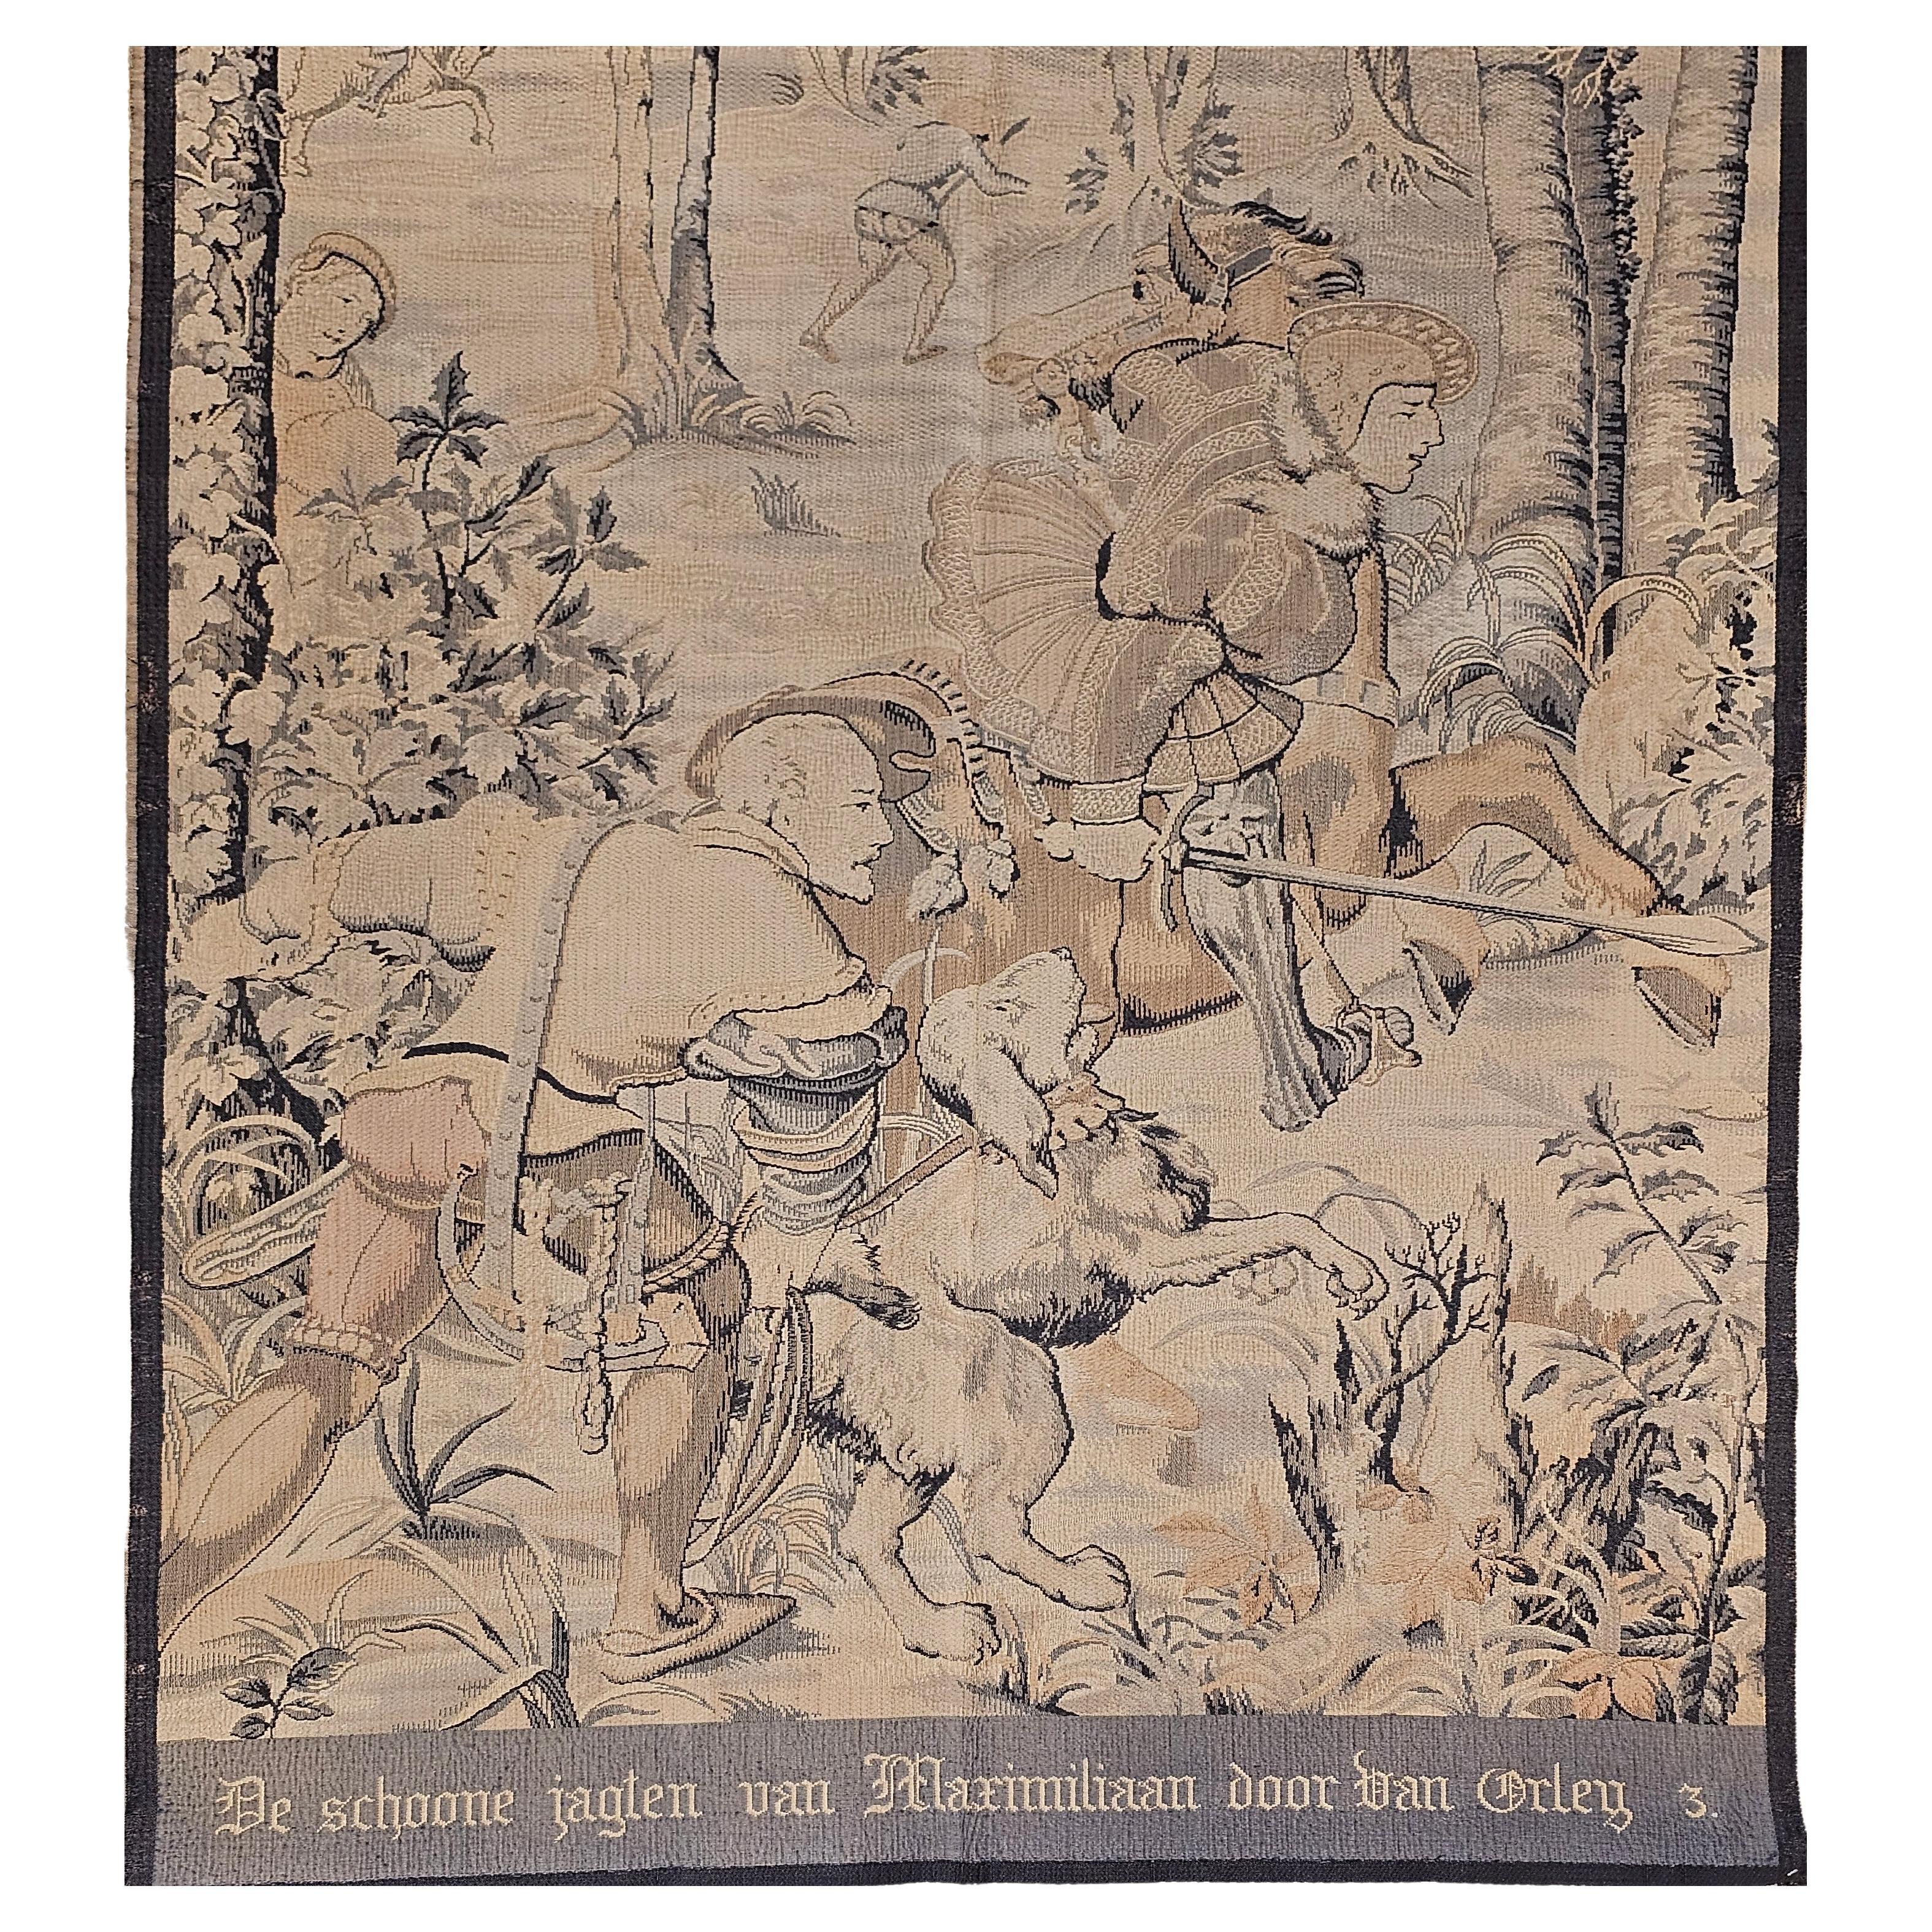 Beautiful 19th century Jacquard Loom machine-woven French tapestry in the style of 16th century Belgium tapestries depicting a forest and hunting scene. This is a reproduction of one of the panels (panel #3)  taken from a famous Renaissance series